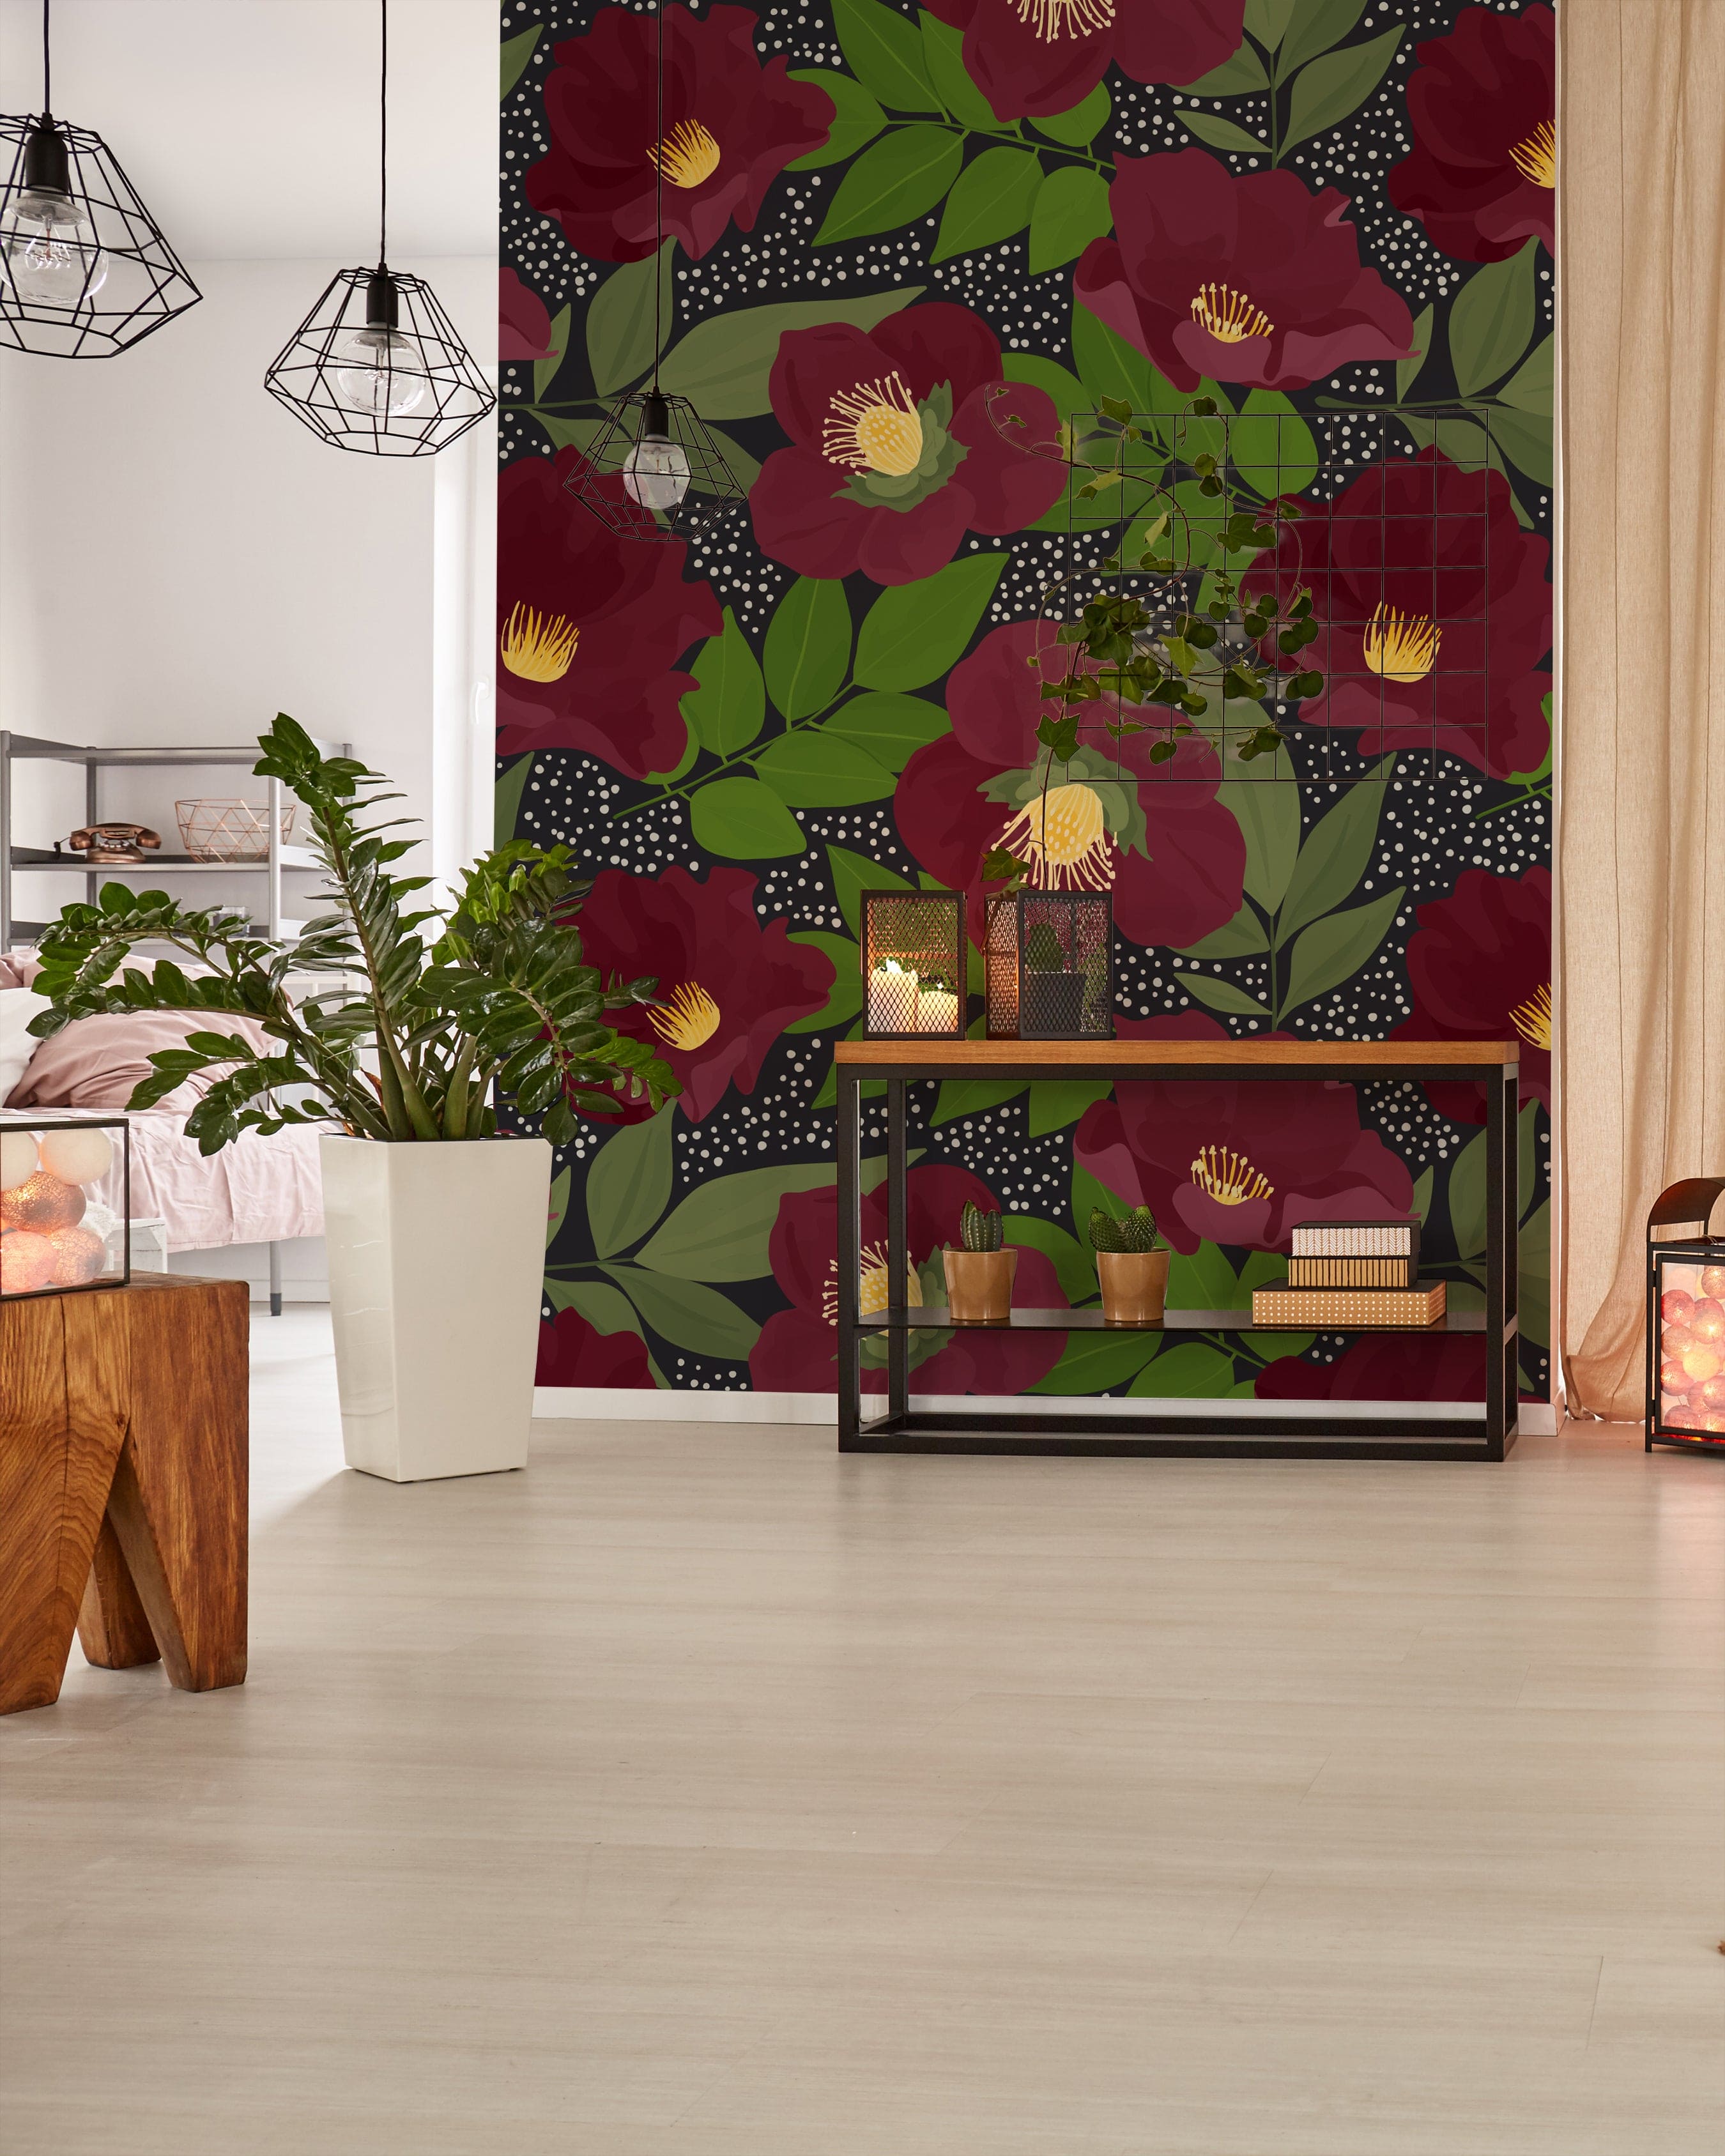 A modern interior space featuring the Merlot Floral Wallpaper, which showcases large, dark red flowers with vibrant green leaves on a dotted black background. The room is styled with contemporary furniture and green houseplants, creating a bold yet inviting atmosphere.